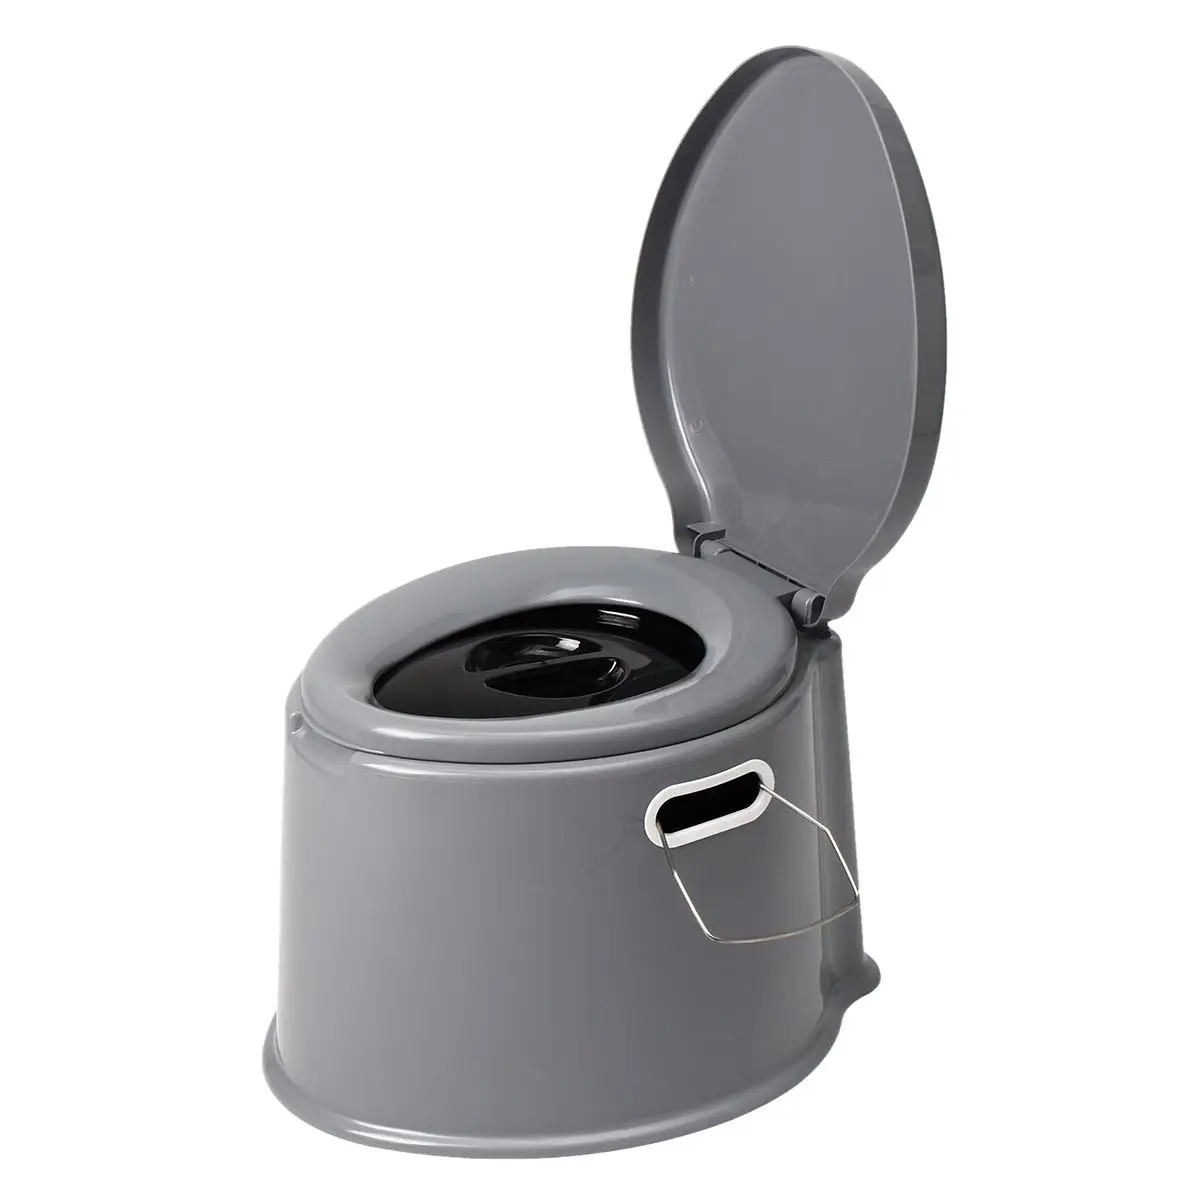 

Portable Toilet Seat Flush Travel Hiking Outdoor Indoor Potty Mobile Toilet Camping Commode Potty Tissue Hook 4 Color 43X35X35cm